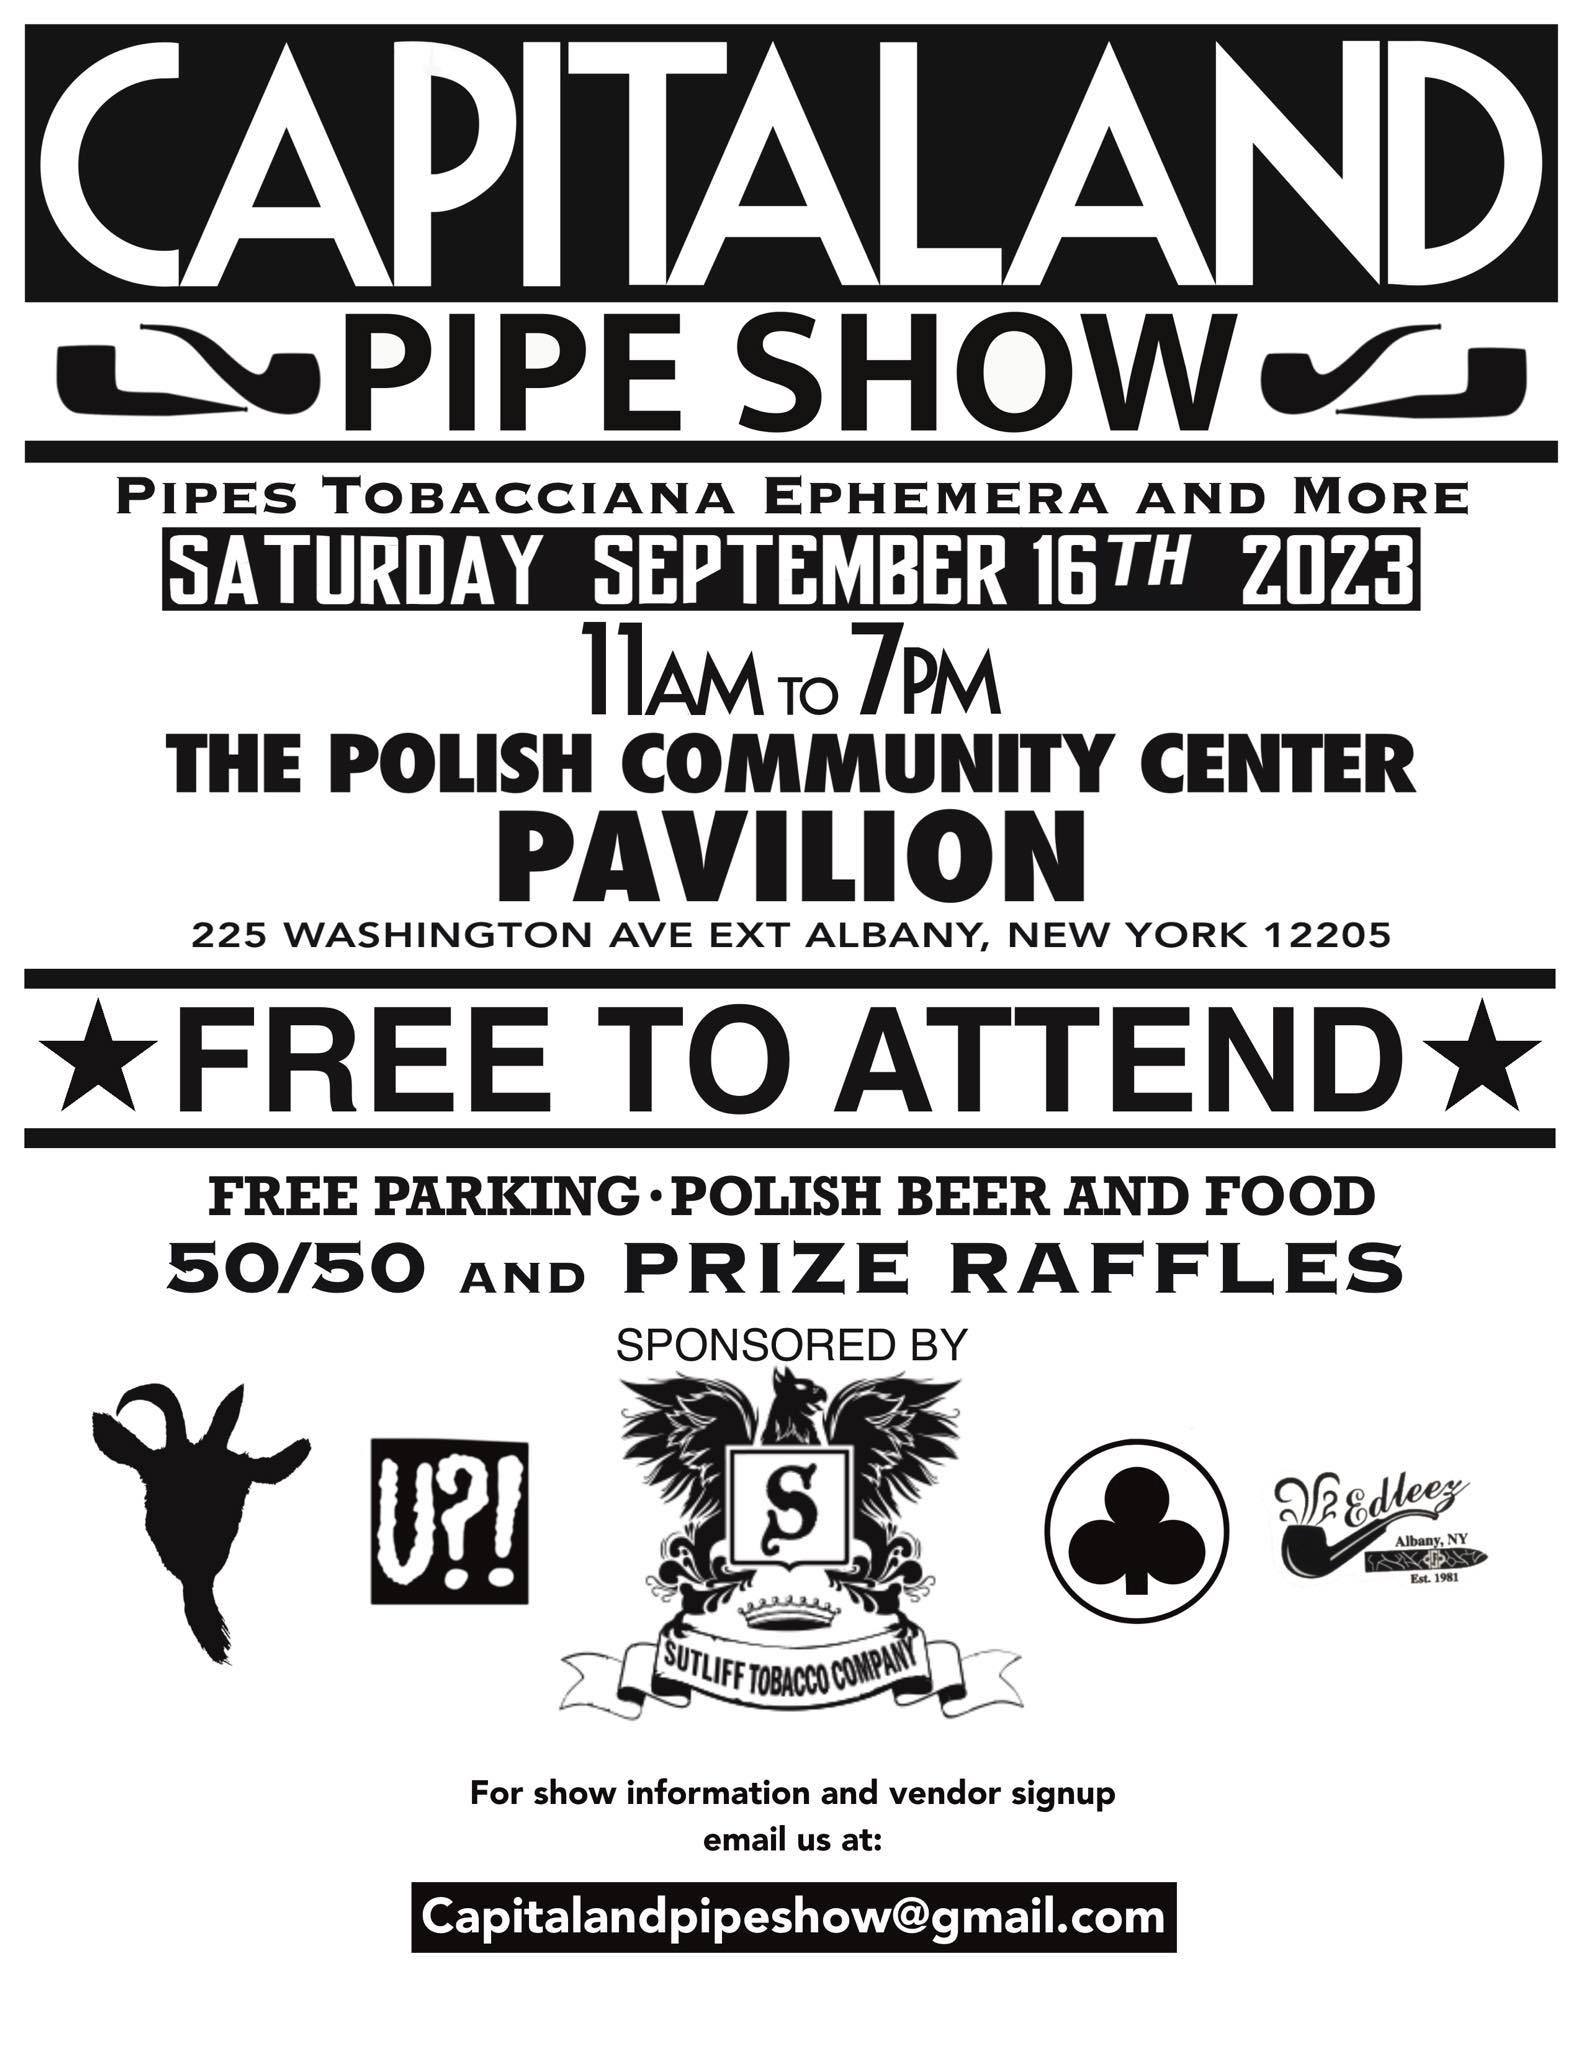 Capitaland Pipe Show Flyer